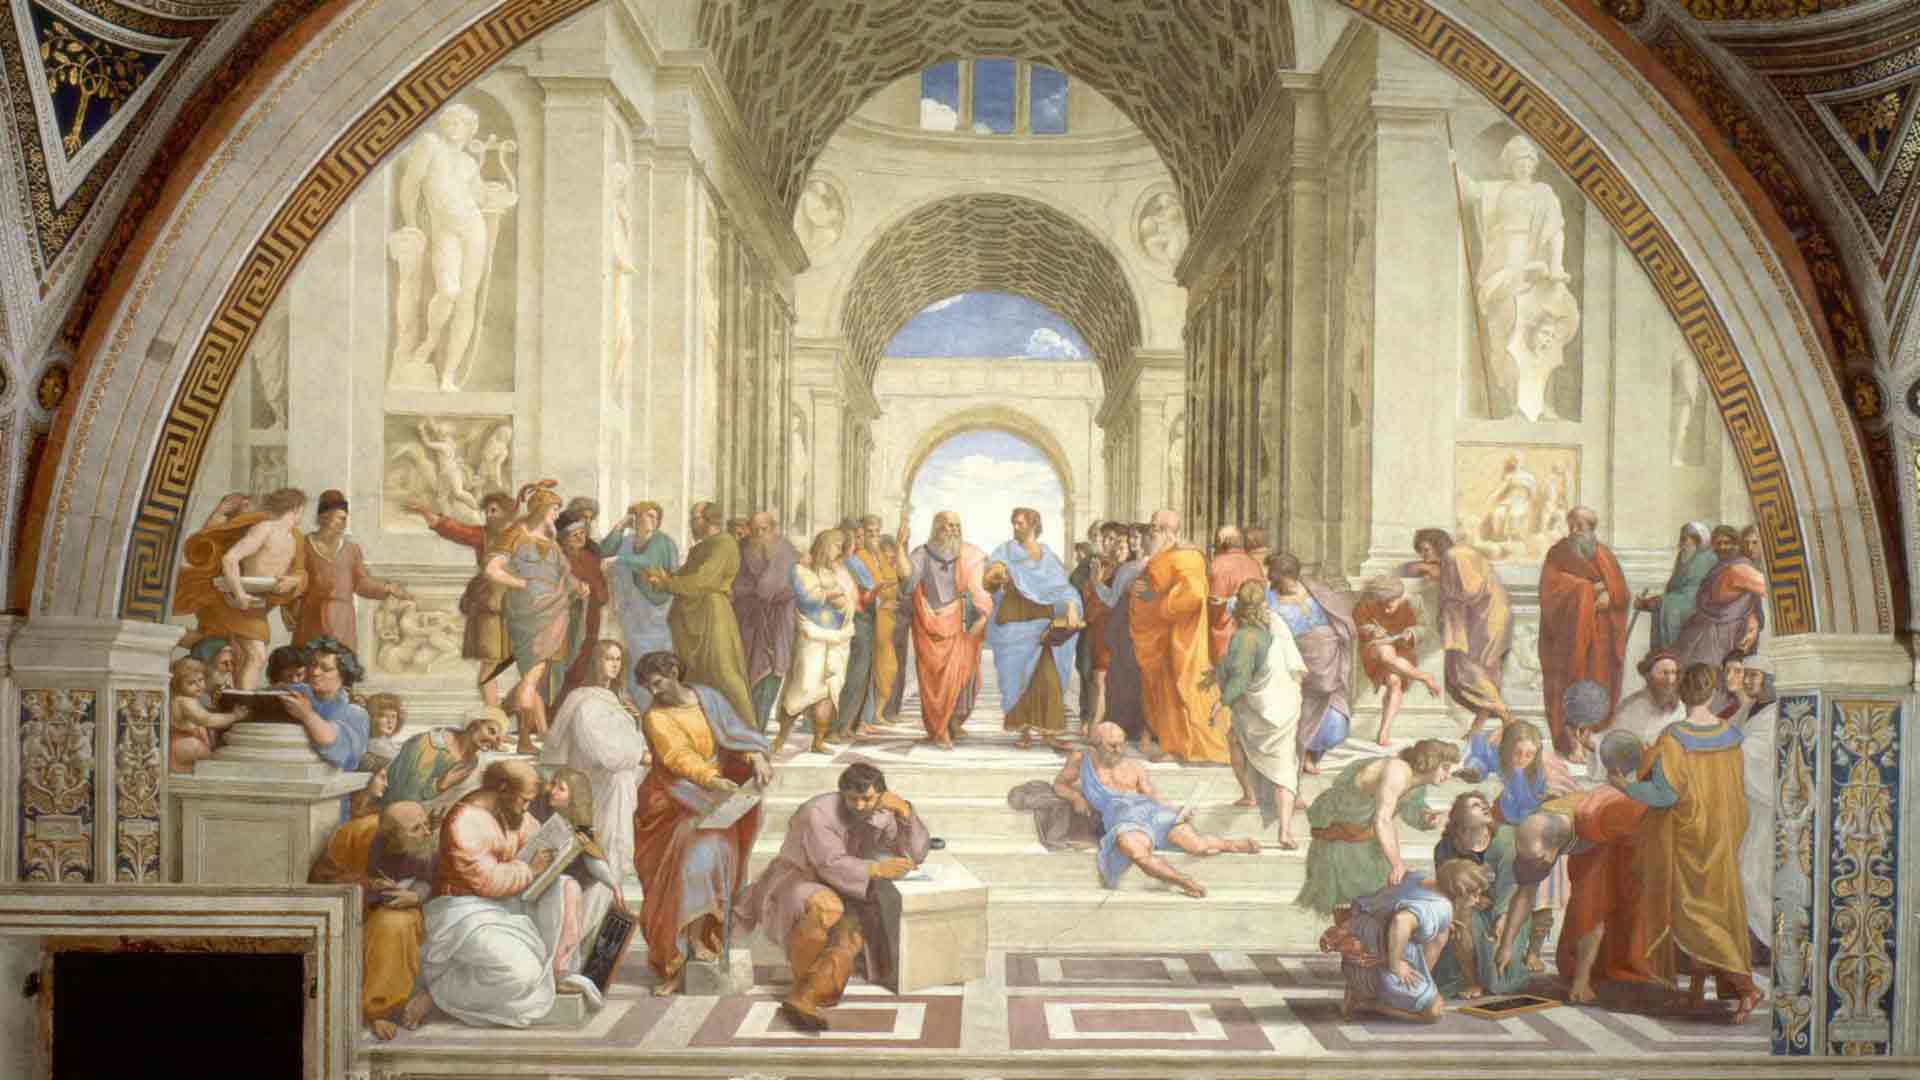 Photo of Raphael Pontifical palace picture of The School of Athens with Aristotle and Plato.